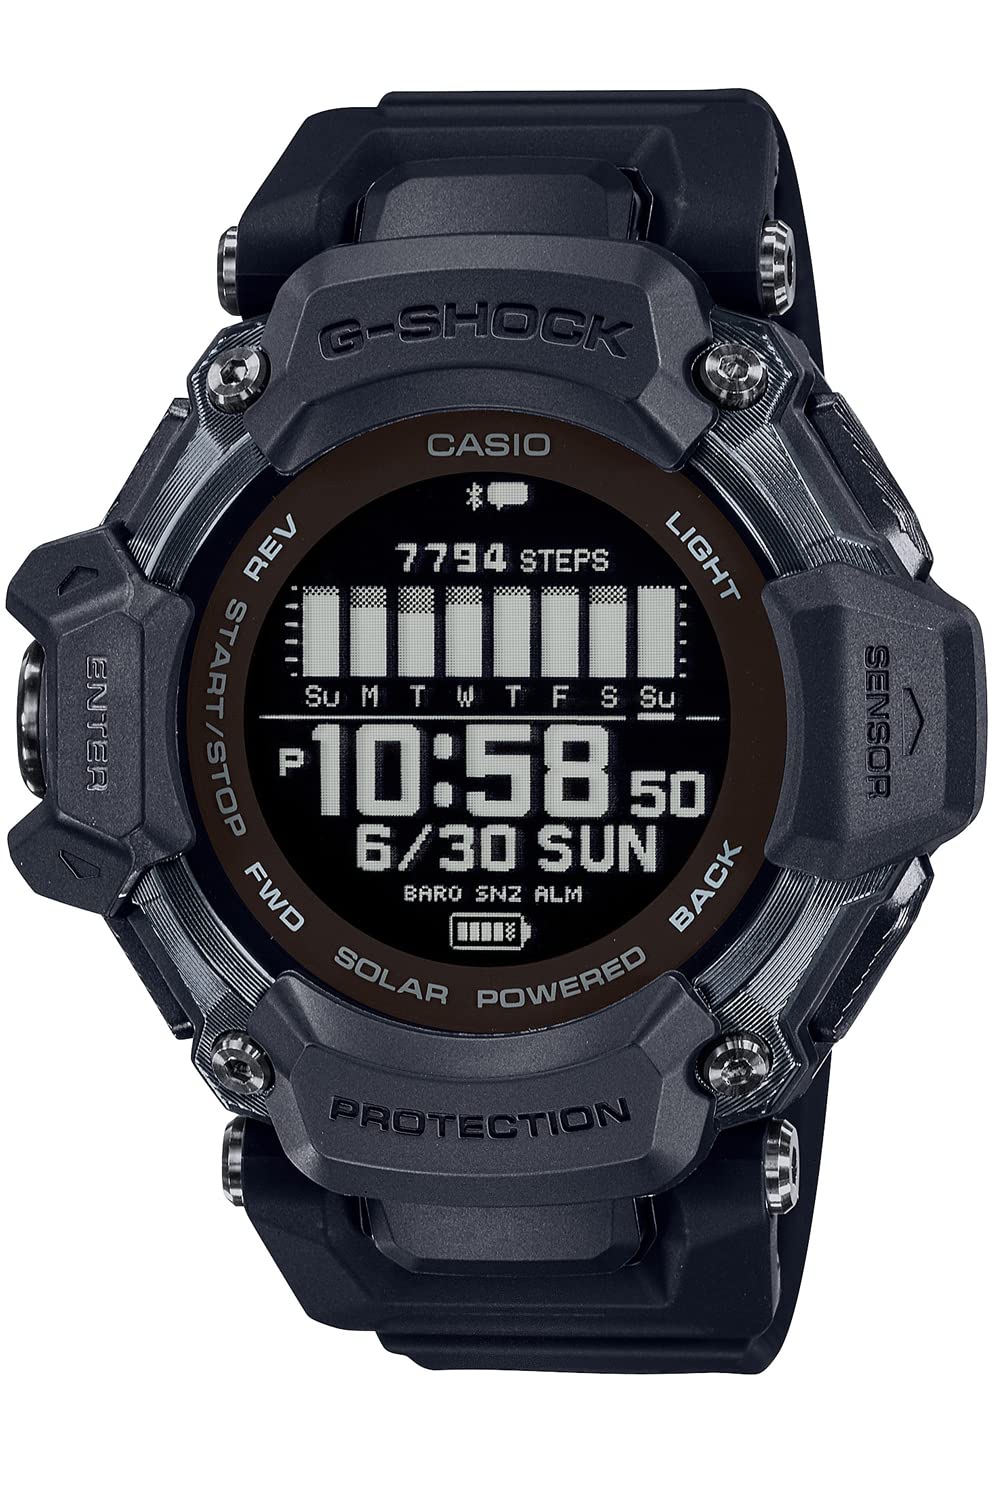 [Casio] G-Shock Watch Genuine Domestic Product G-SQUAD GPS Heart Rate Monitor with Bluetooth GBD-H2000-1BJR Men's Black - BanzaiHobby